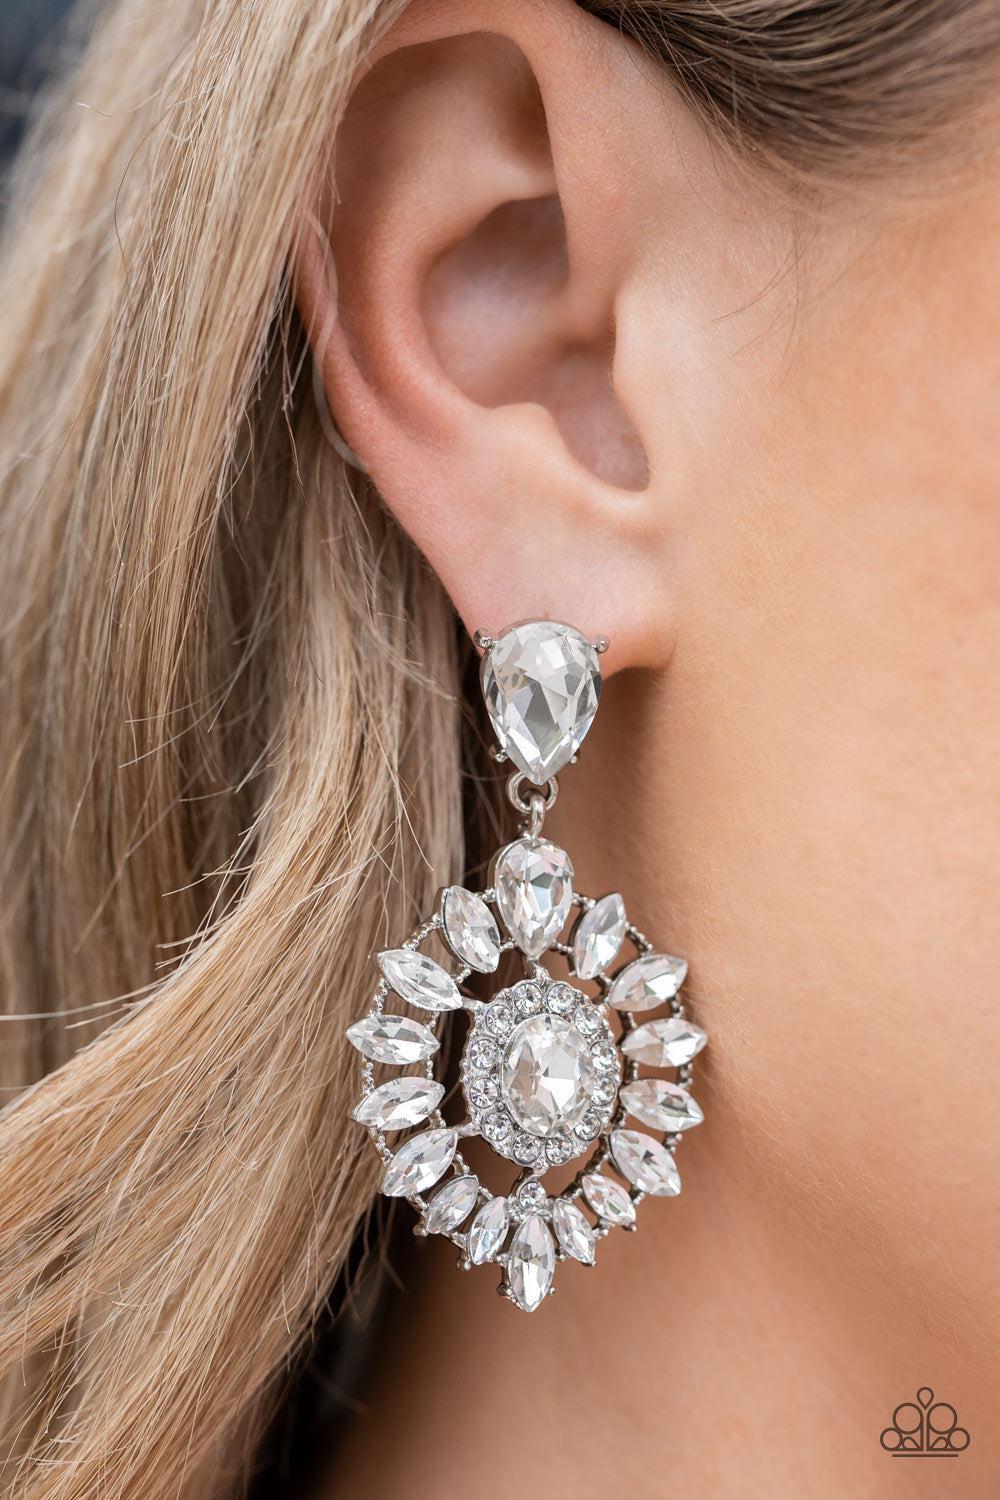 My Good LUXE Charm White Rhinestone Earrings - Paparazzi Accessories-on model - CarasShop.com - $5 Jewelry by Cara Jewels